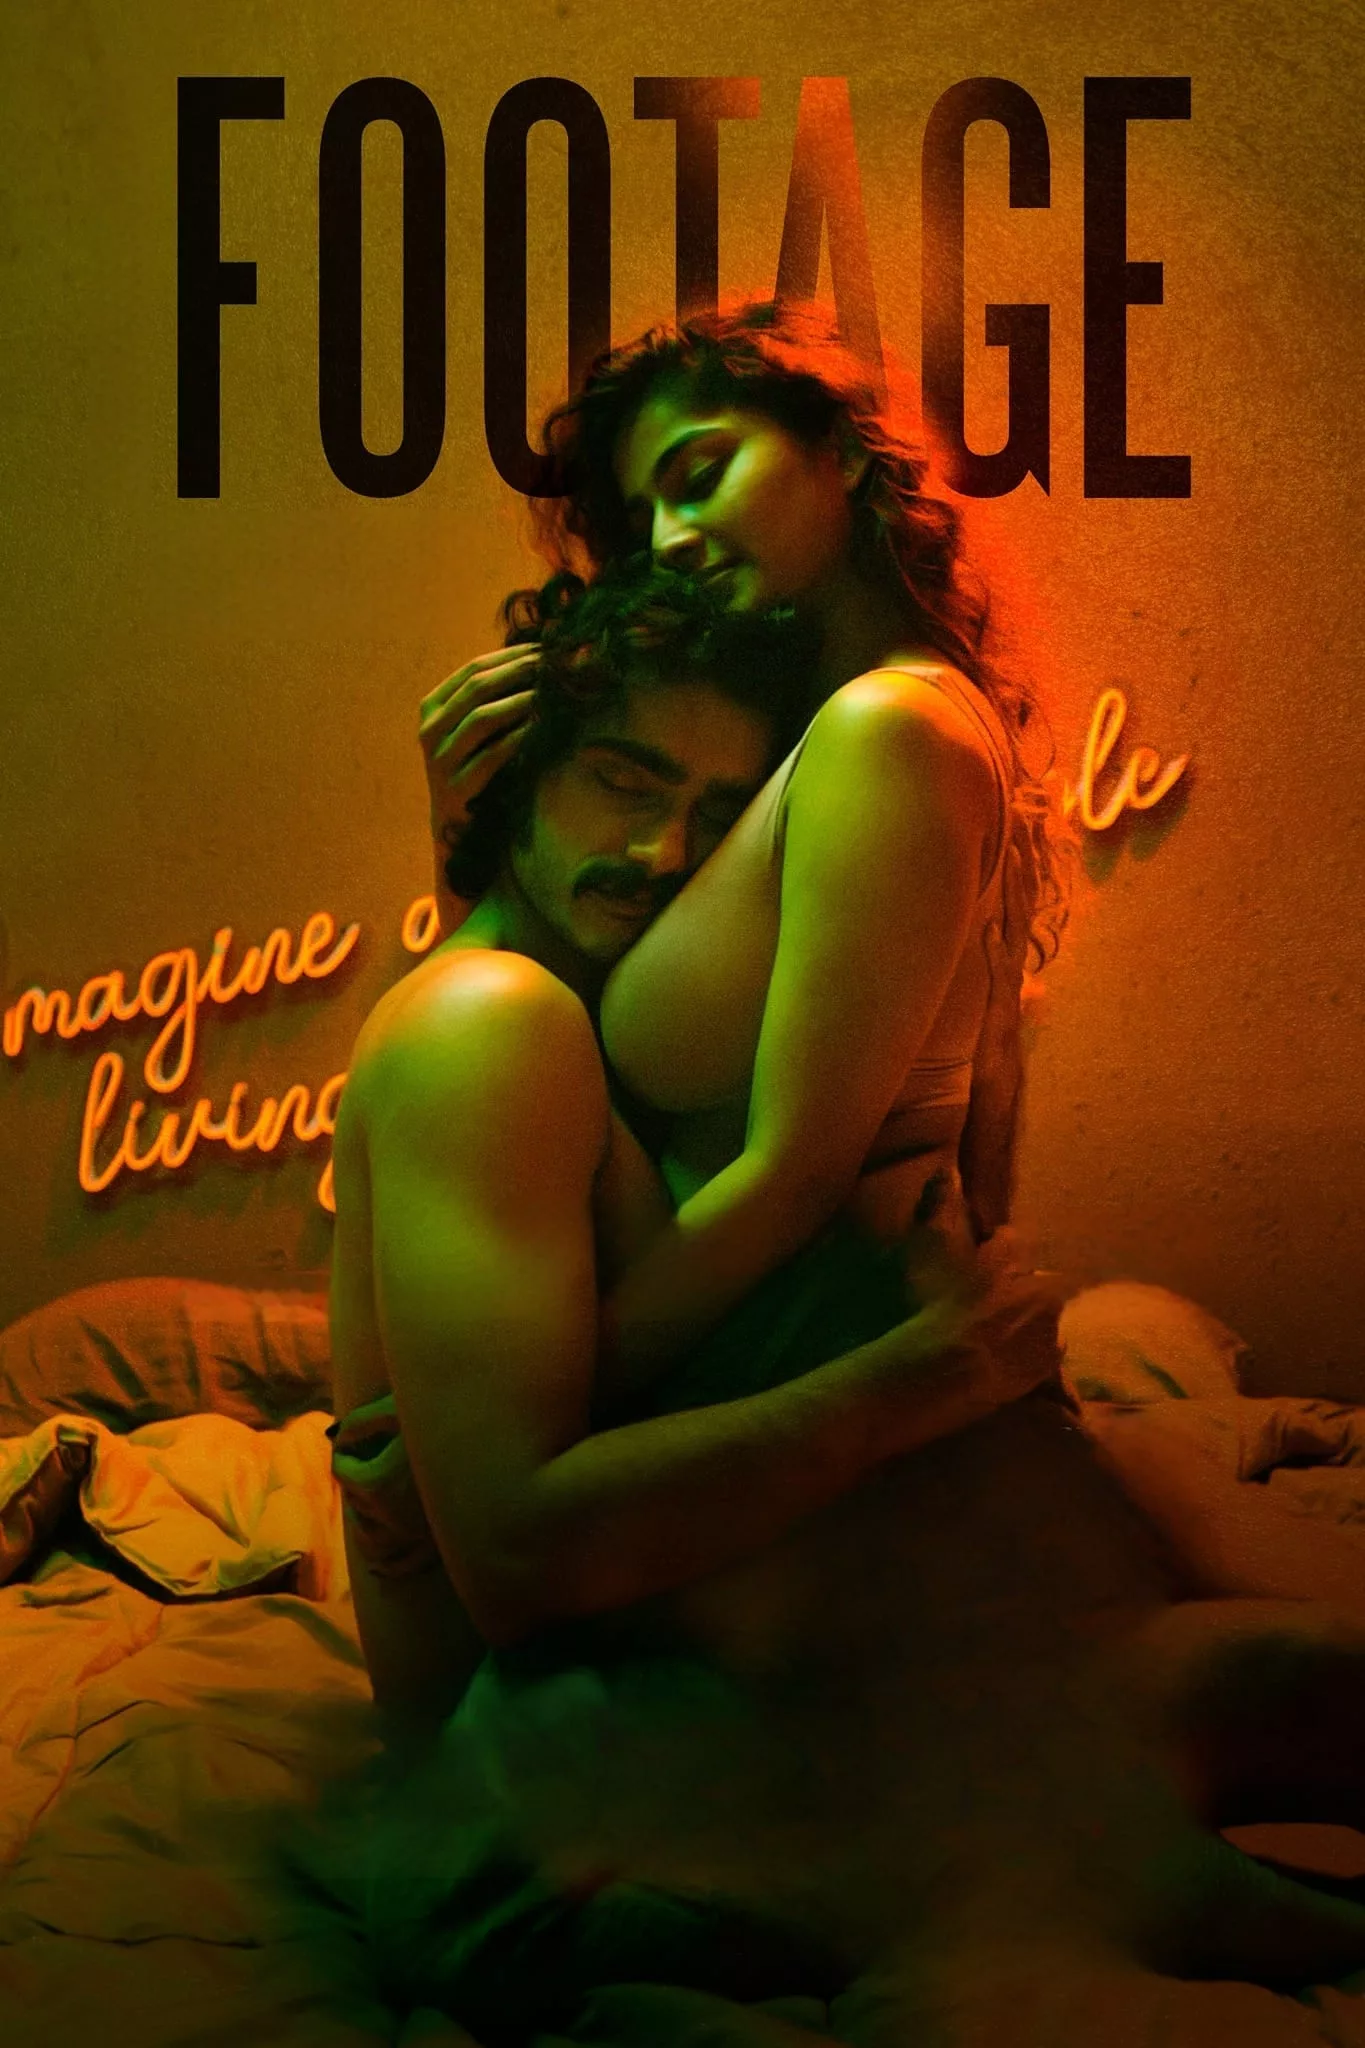 Poster for the movie "Footage"